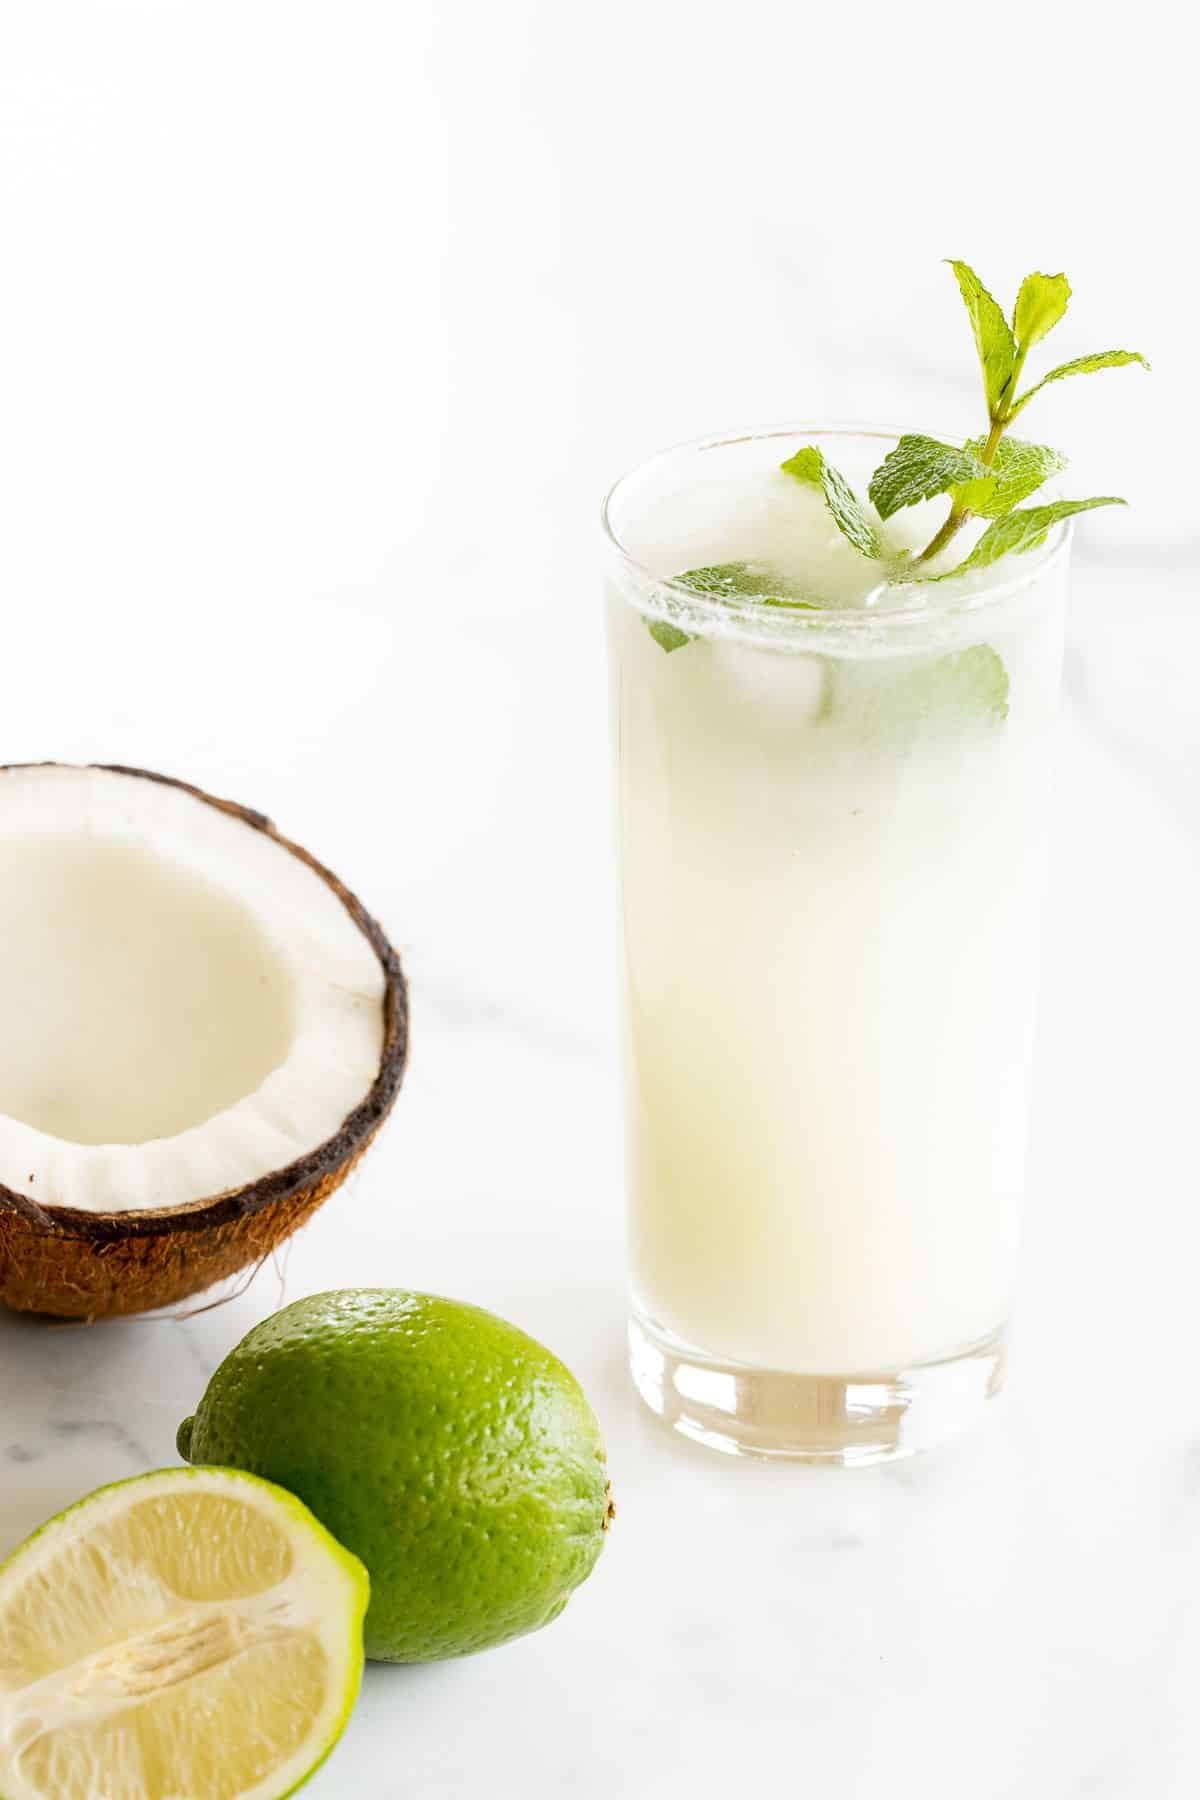 On a marble surface, a coconut mojito garnished with mint, half a coconut and a full lime near the glass.